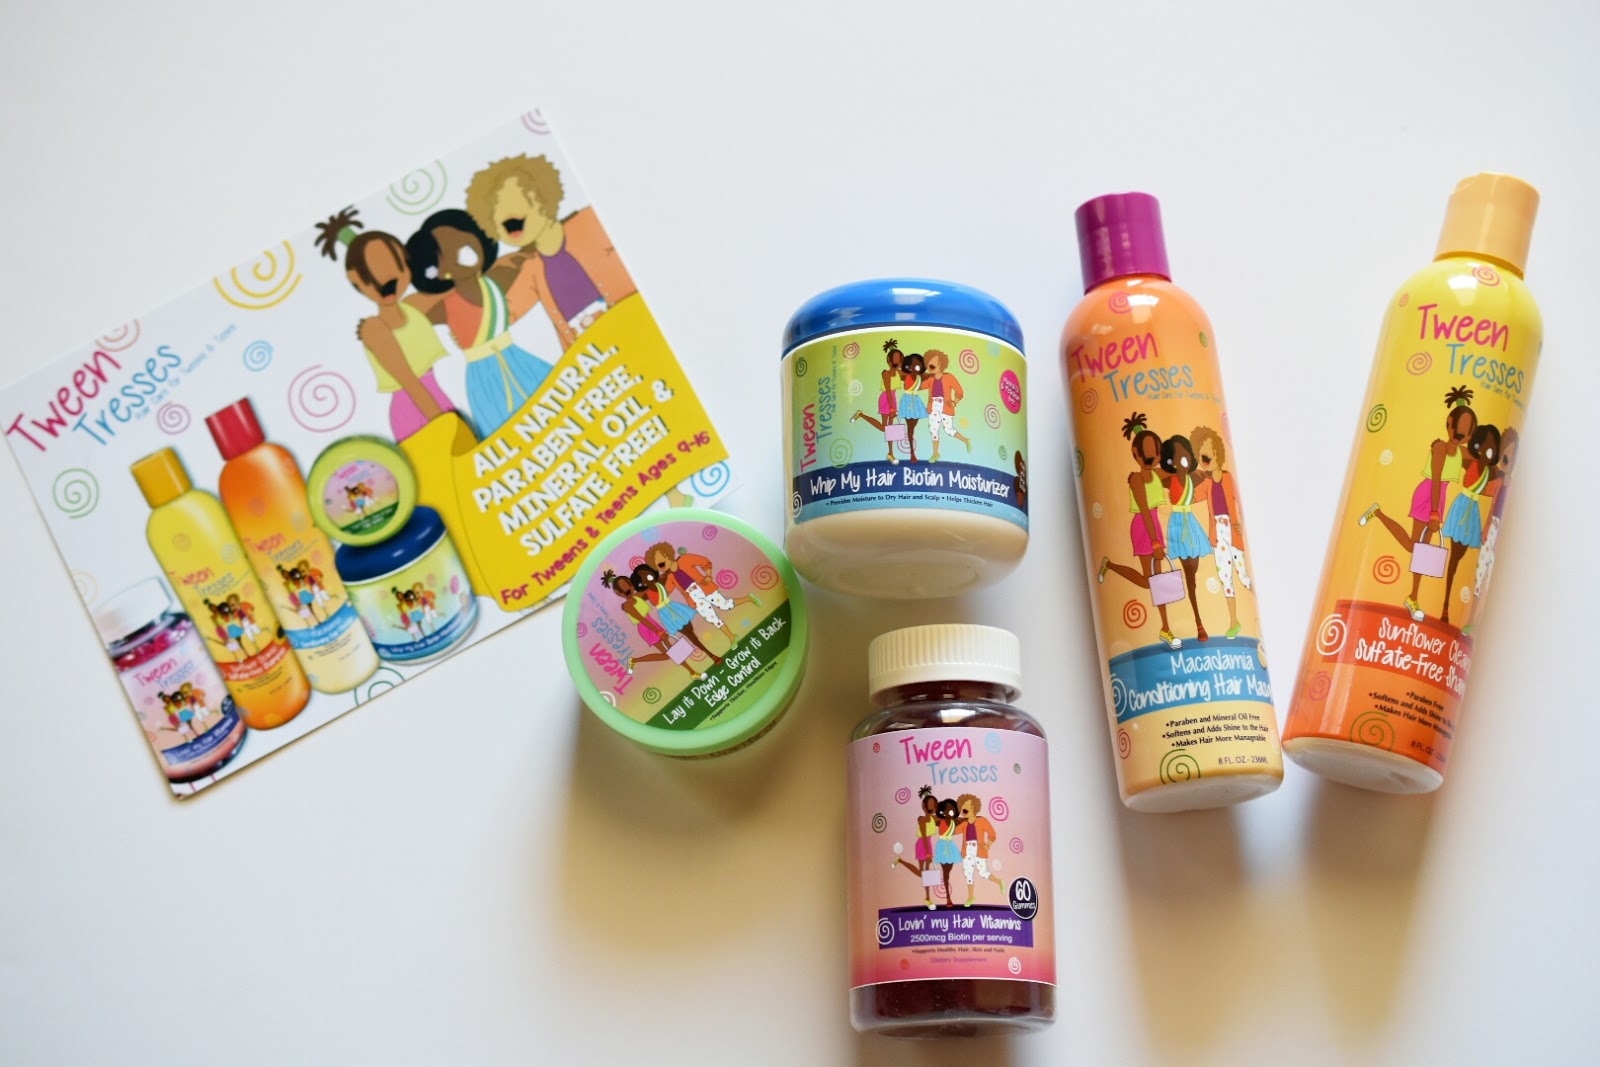 Hair Care Products for Tweens and Teens: Tween Tresses Review  via  www.productreviewmom.com